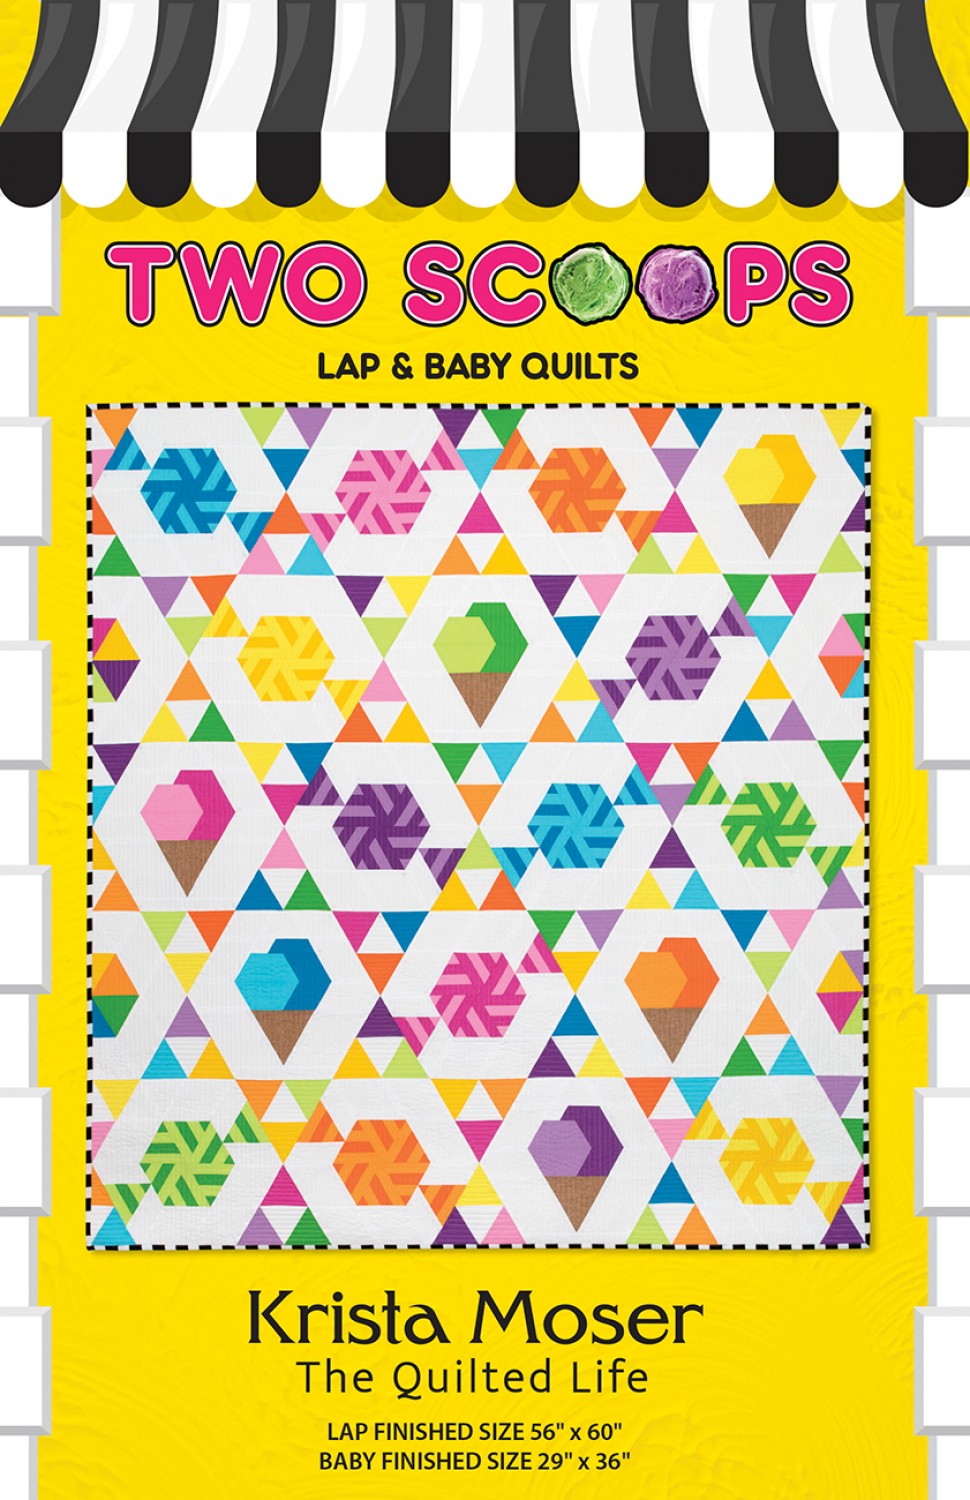 Two Scoops Quilt Pattern by Krista Moser of The Quilted Life